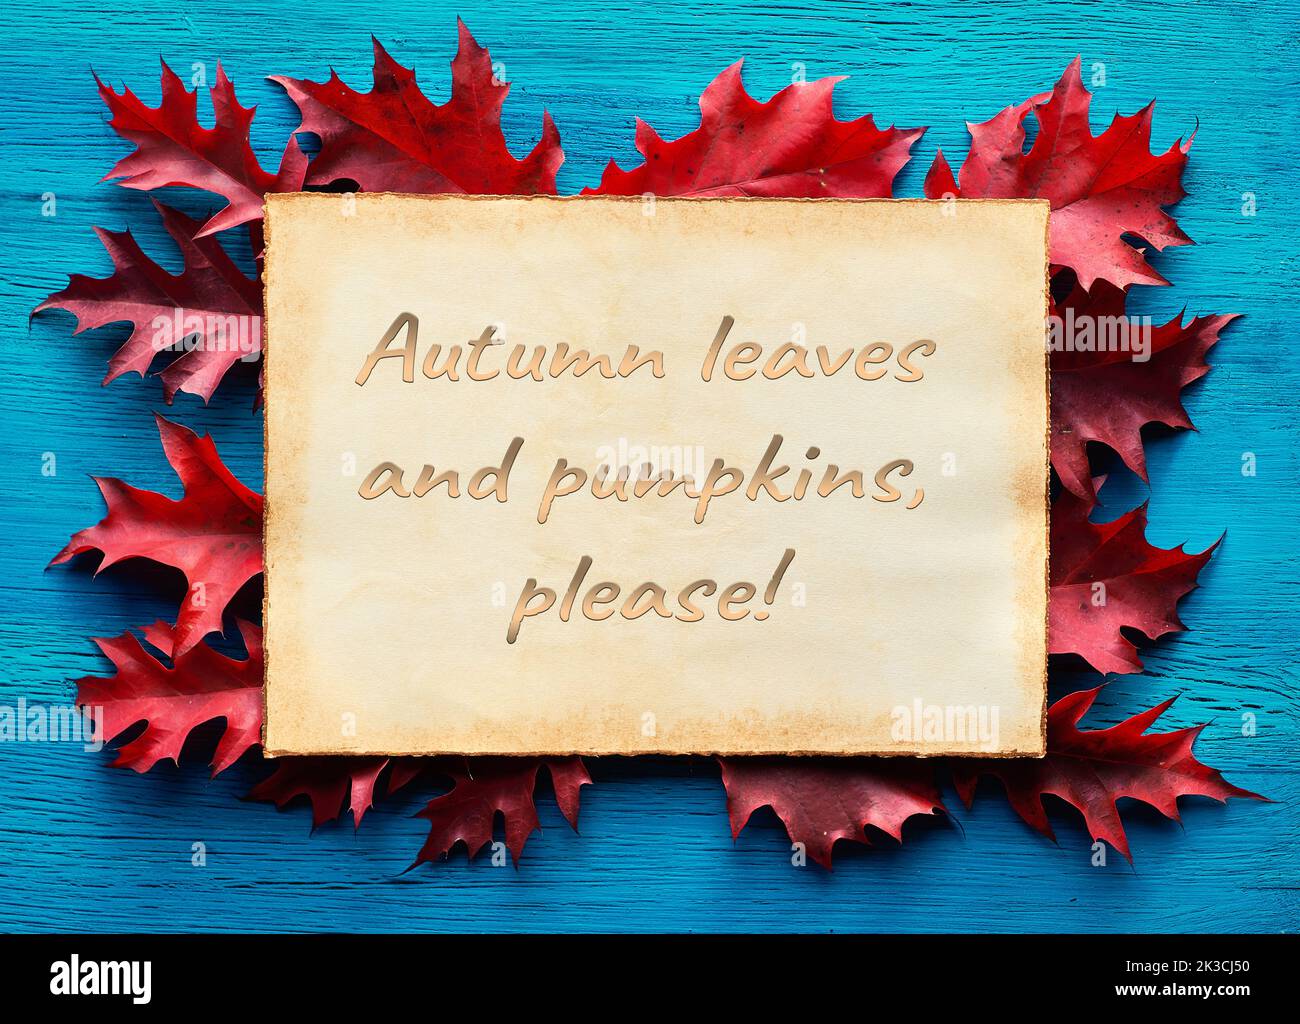 Text Autumn leaves and pumpkins, please, on parchment. Frame from red oak leaves on turquoise cracked board. Natural Fall background. Stock Photo